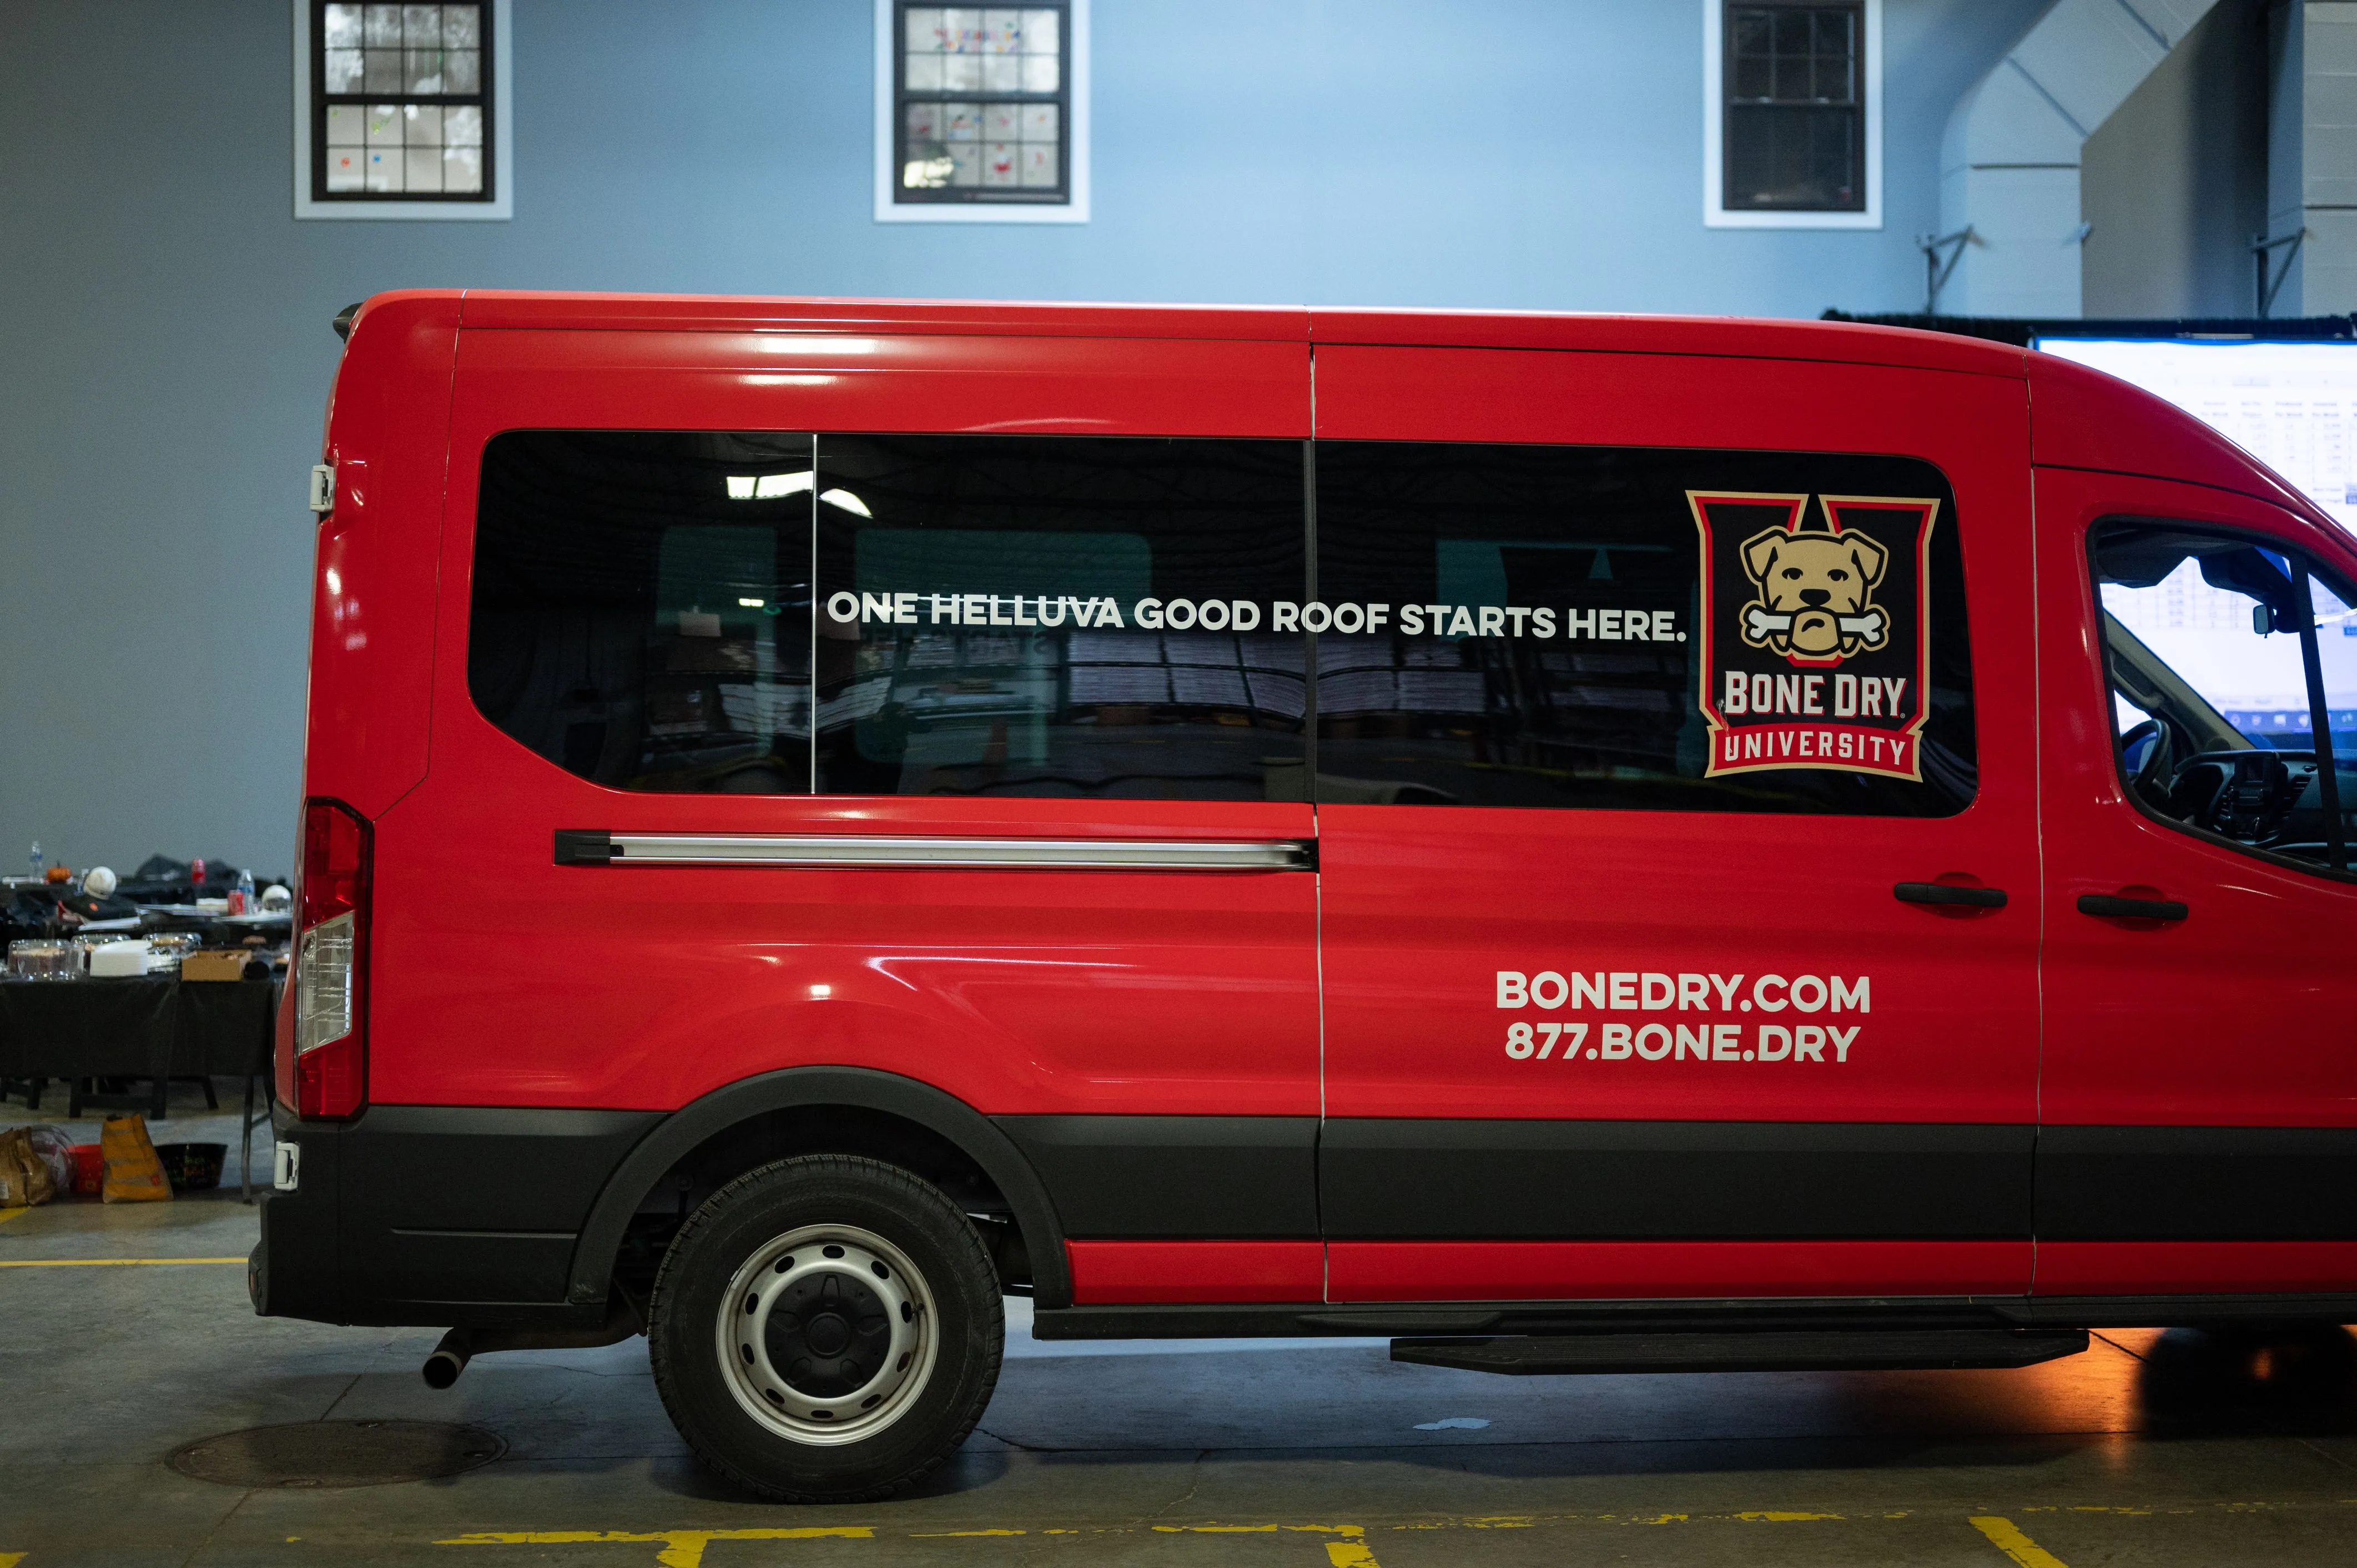 A red delivery van parked inside a building with promotional text and website URL on its side panel.